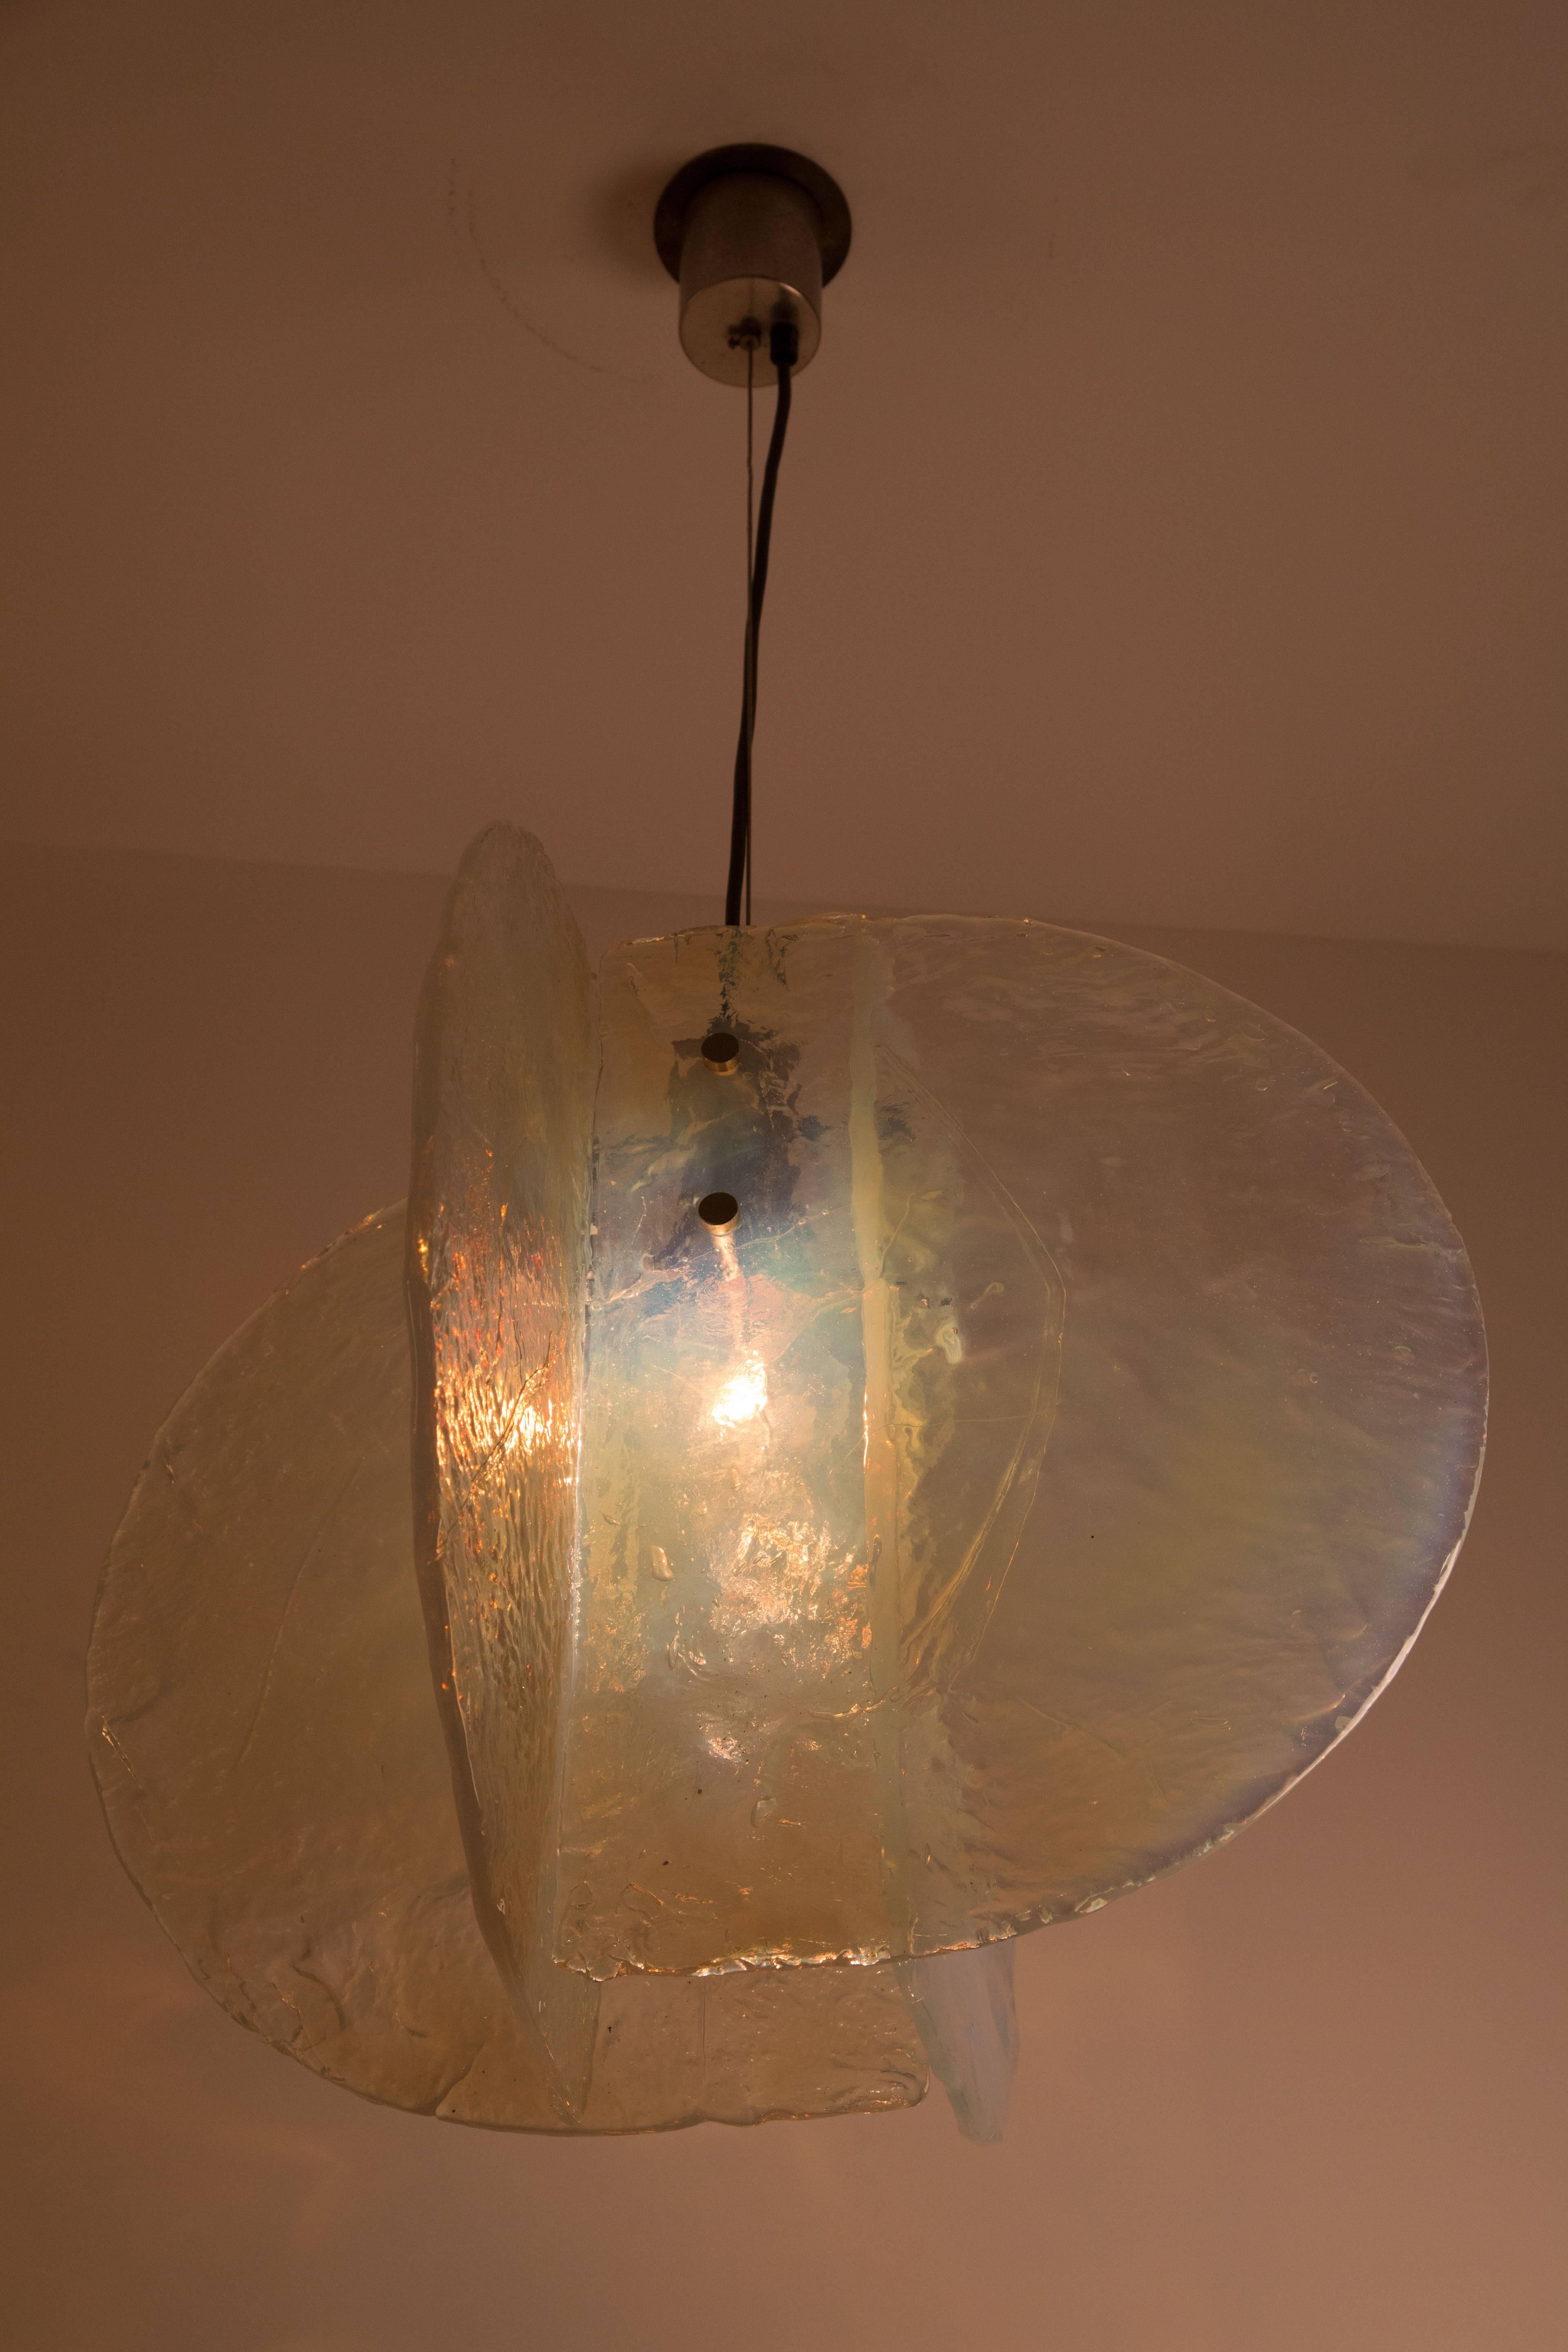 Textured glass pendant by Carlo Nason for Mazzega. Made from intersecting opalescent textured glass panels with nickel-plated brass hardware. Rewired. Overall drop can be customized. Takes an E27 75W maximum bulb.